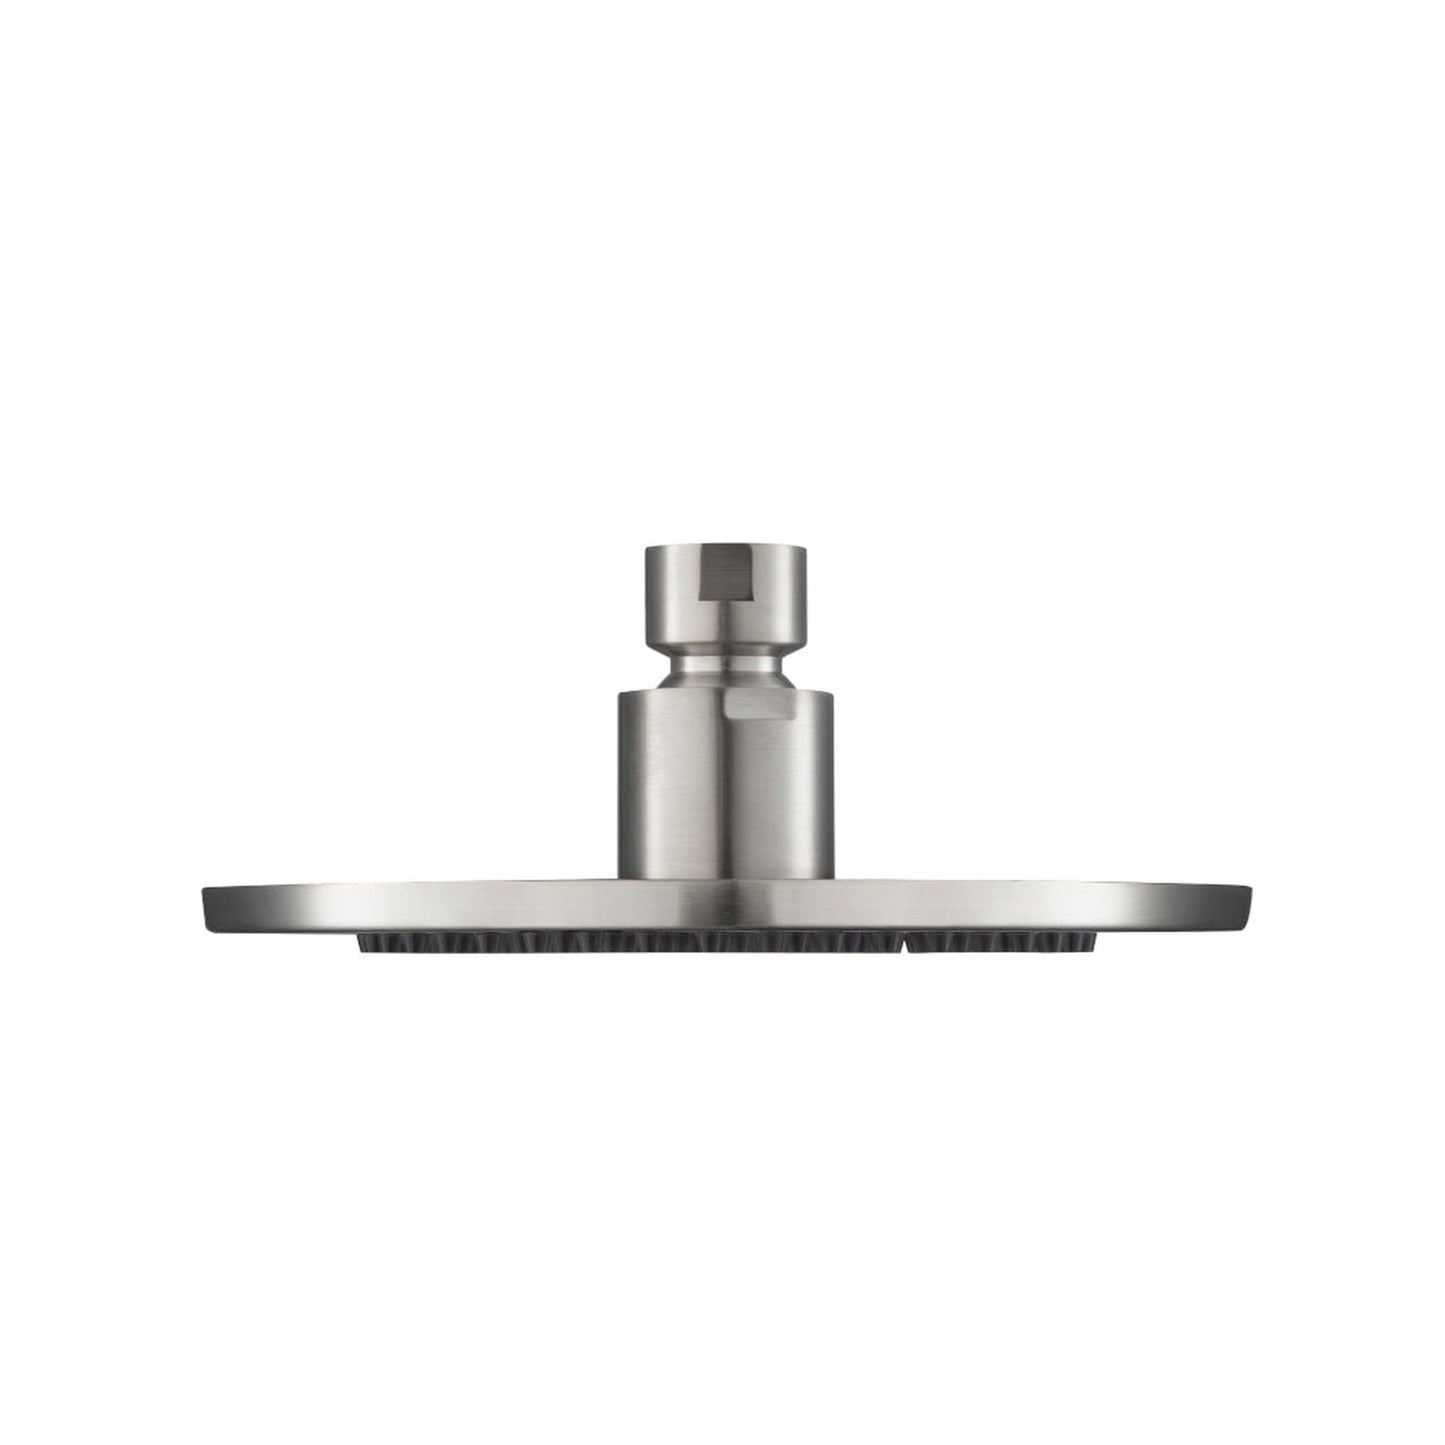 Isenberg Serie 100 Single Output Brushed Nickel PVD Wall-Mounted Shower Set With 6" Solid Brass Rainhead Shower Head, Single Handle Shower Trim and 1-Output Single Control Pressure Balance Valve